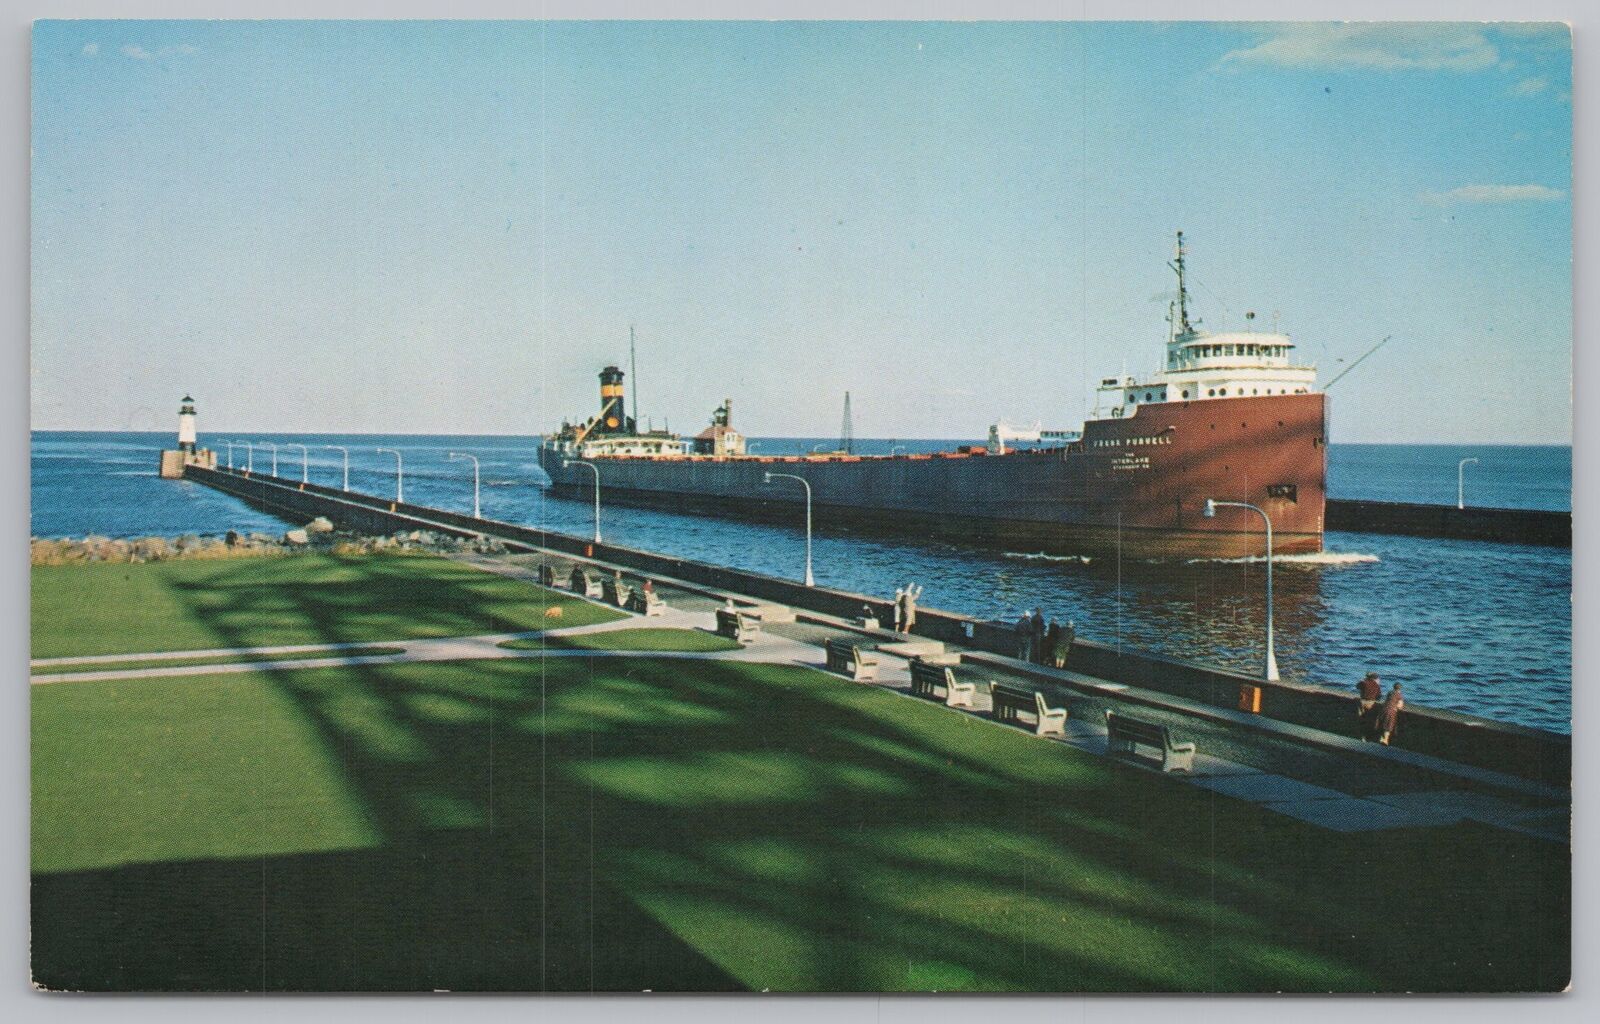 Giant Freighter Entering Canal Park Of Duluth-Superior Harbor Minnesota~Vtg PC